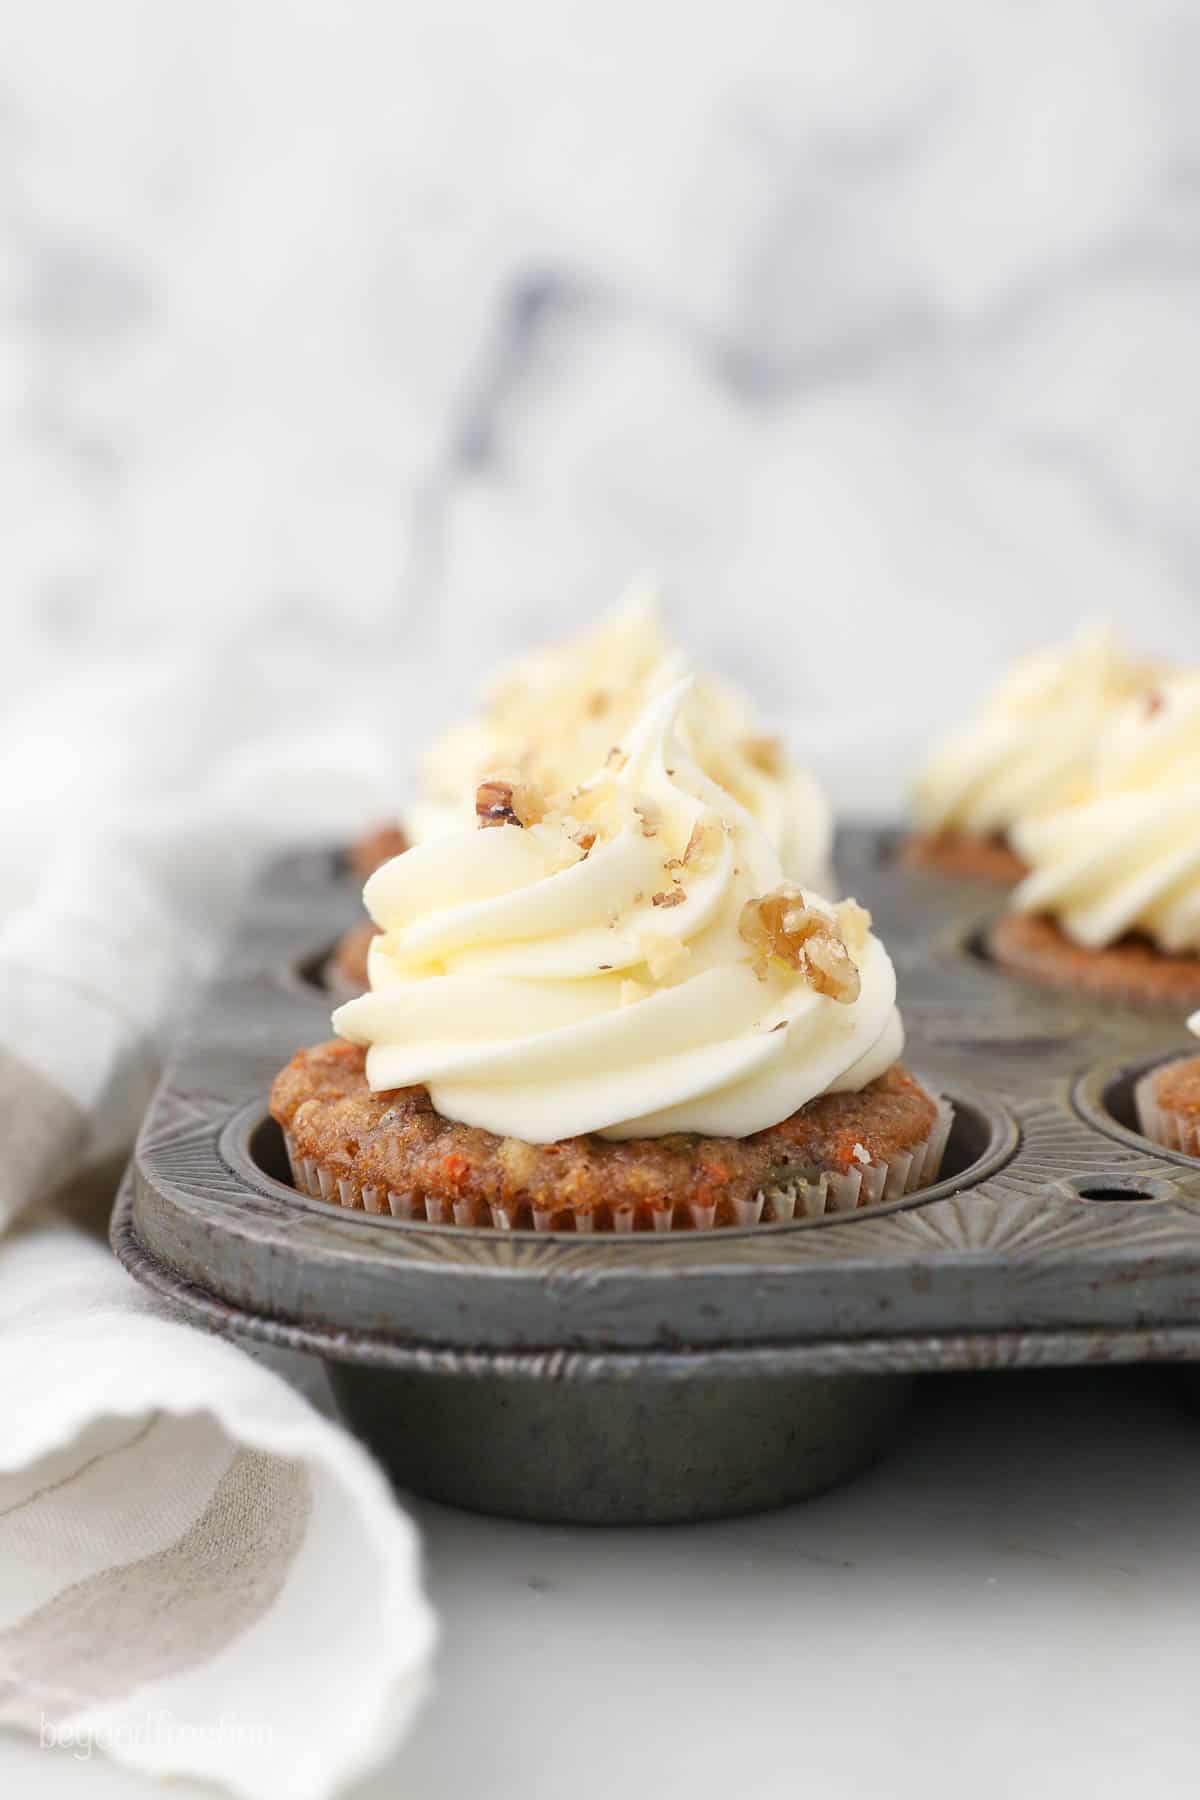 Freshly-baked cupcakes inside of a metal muffin tin with a cloth napkin leaning up against it